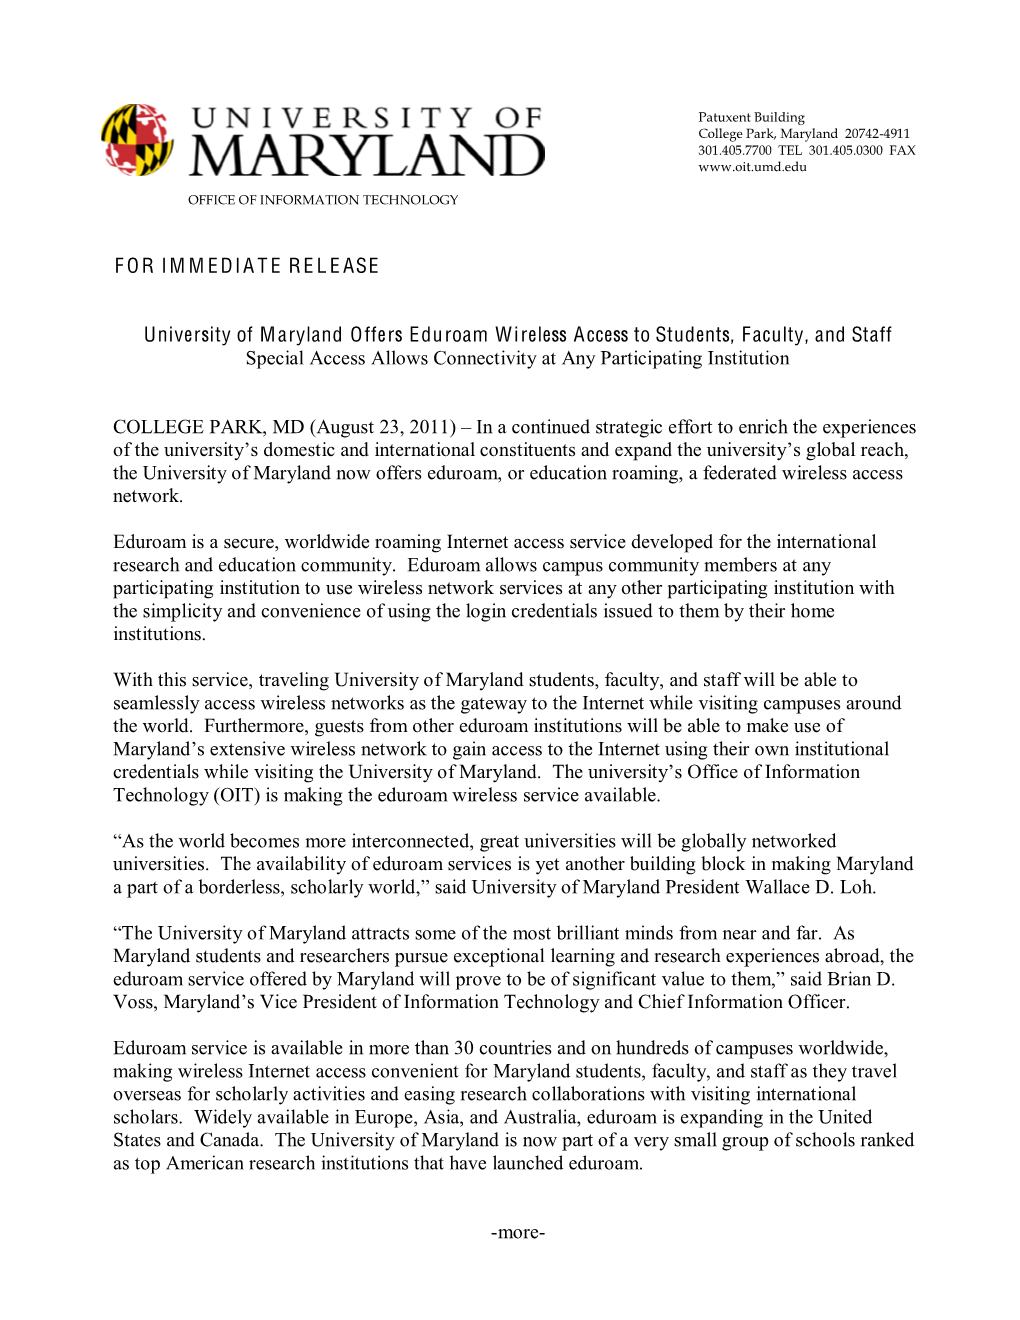 FOR IMMEDIATE RELEASE University of Maryland Offers Eduroam Wireless Access to Students, Faculty, and Staff Special Access Allow